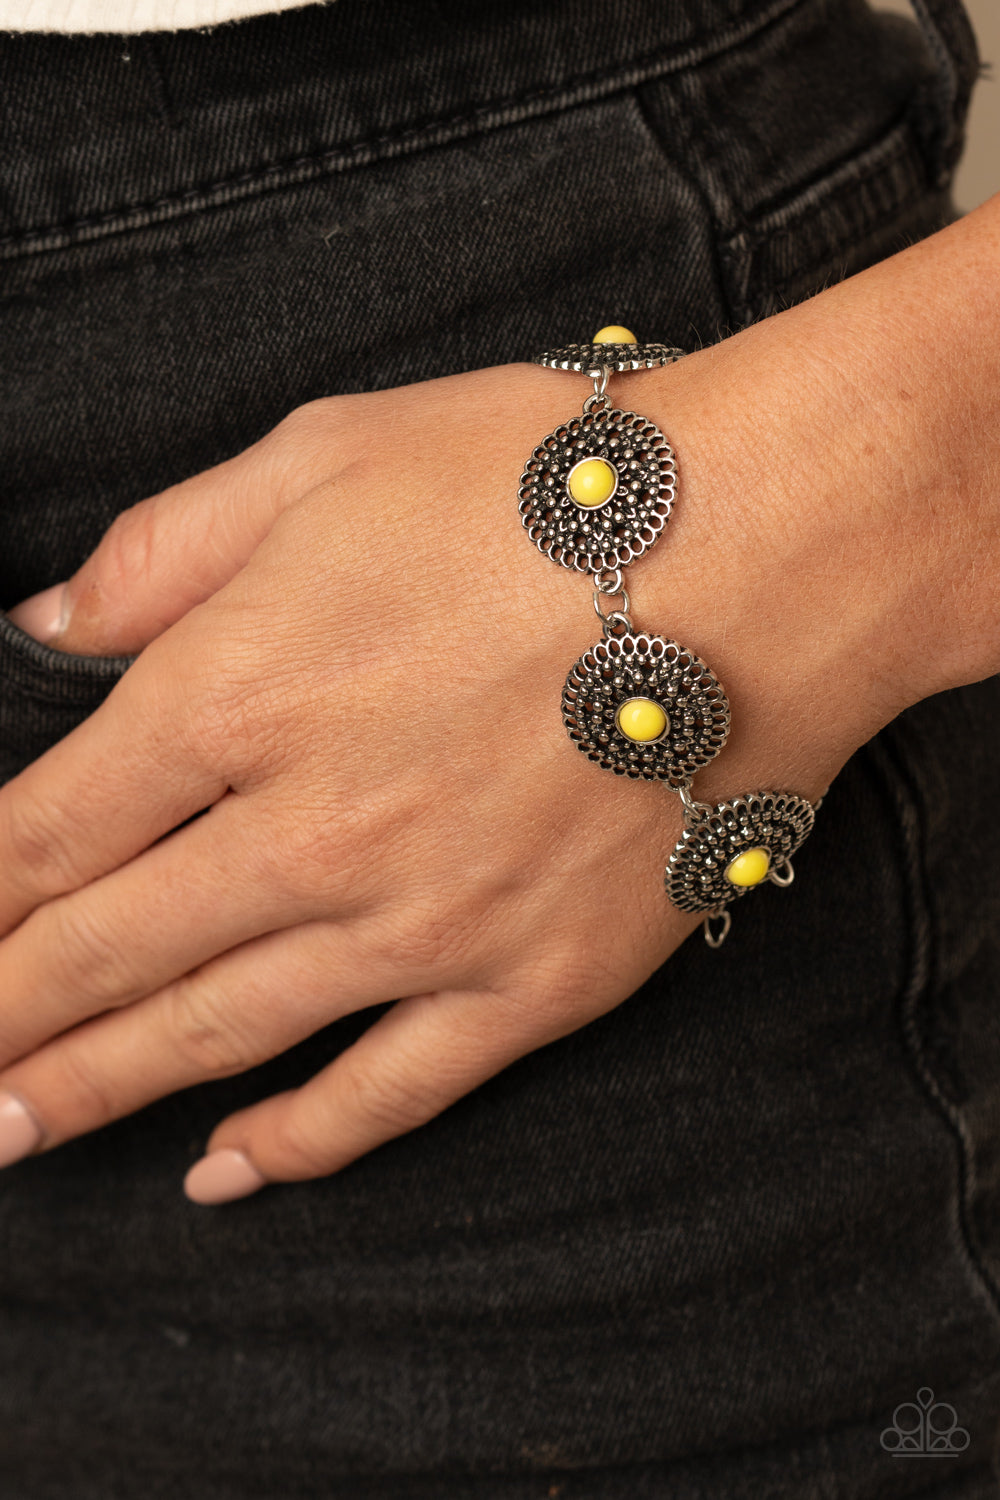 Mojave Mandalas - Yellow and Silver Bracelet - Paparazzi Accessories - Dotted with dainty yellow beaded centers, shimmery studded silver floral frames delicately link around the wrist for a colorfully whimsical look. Features an adjustable clasp closure. Sold as one individual bracelet.